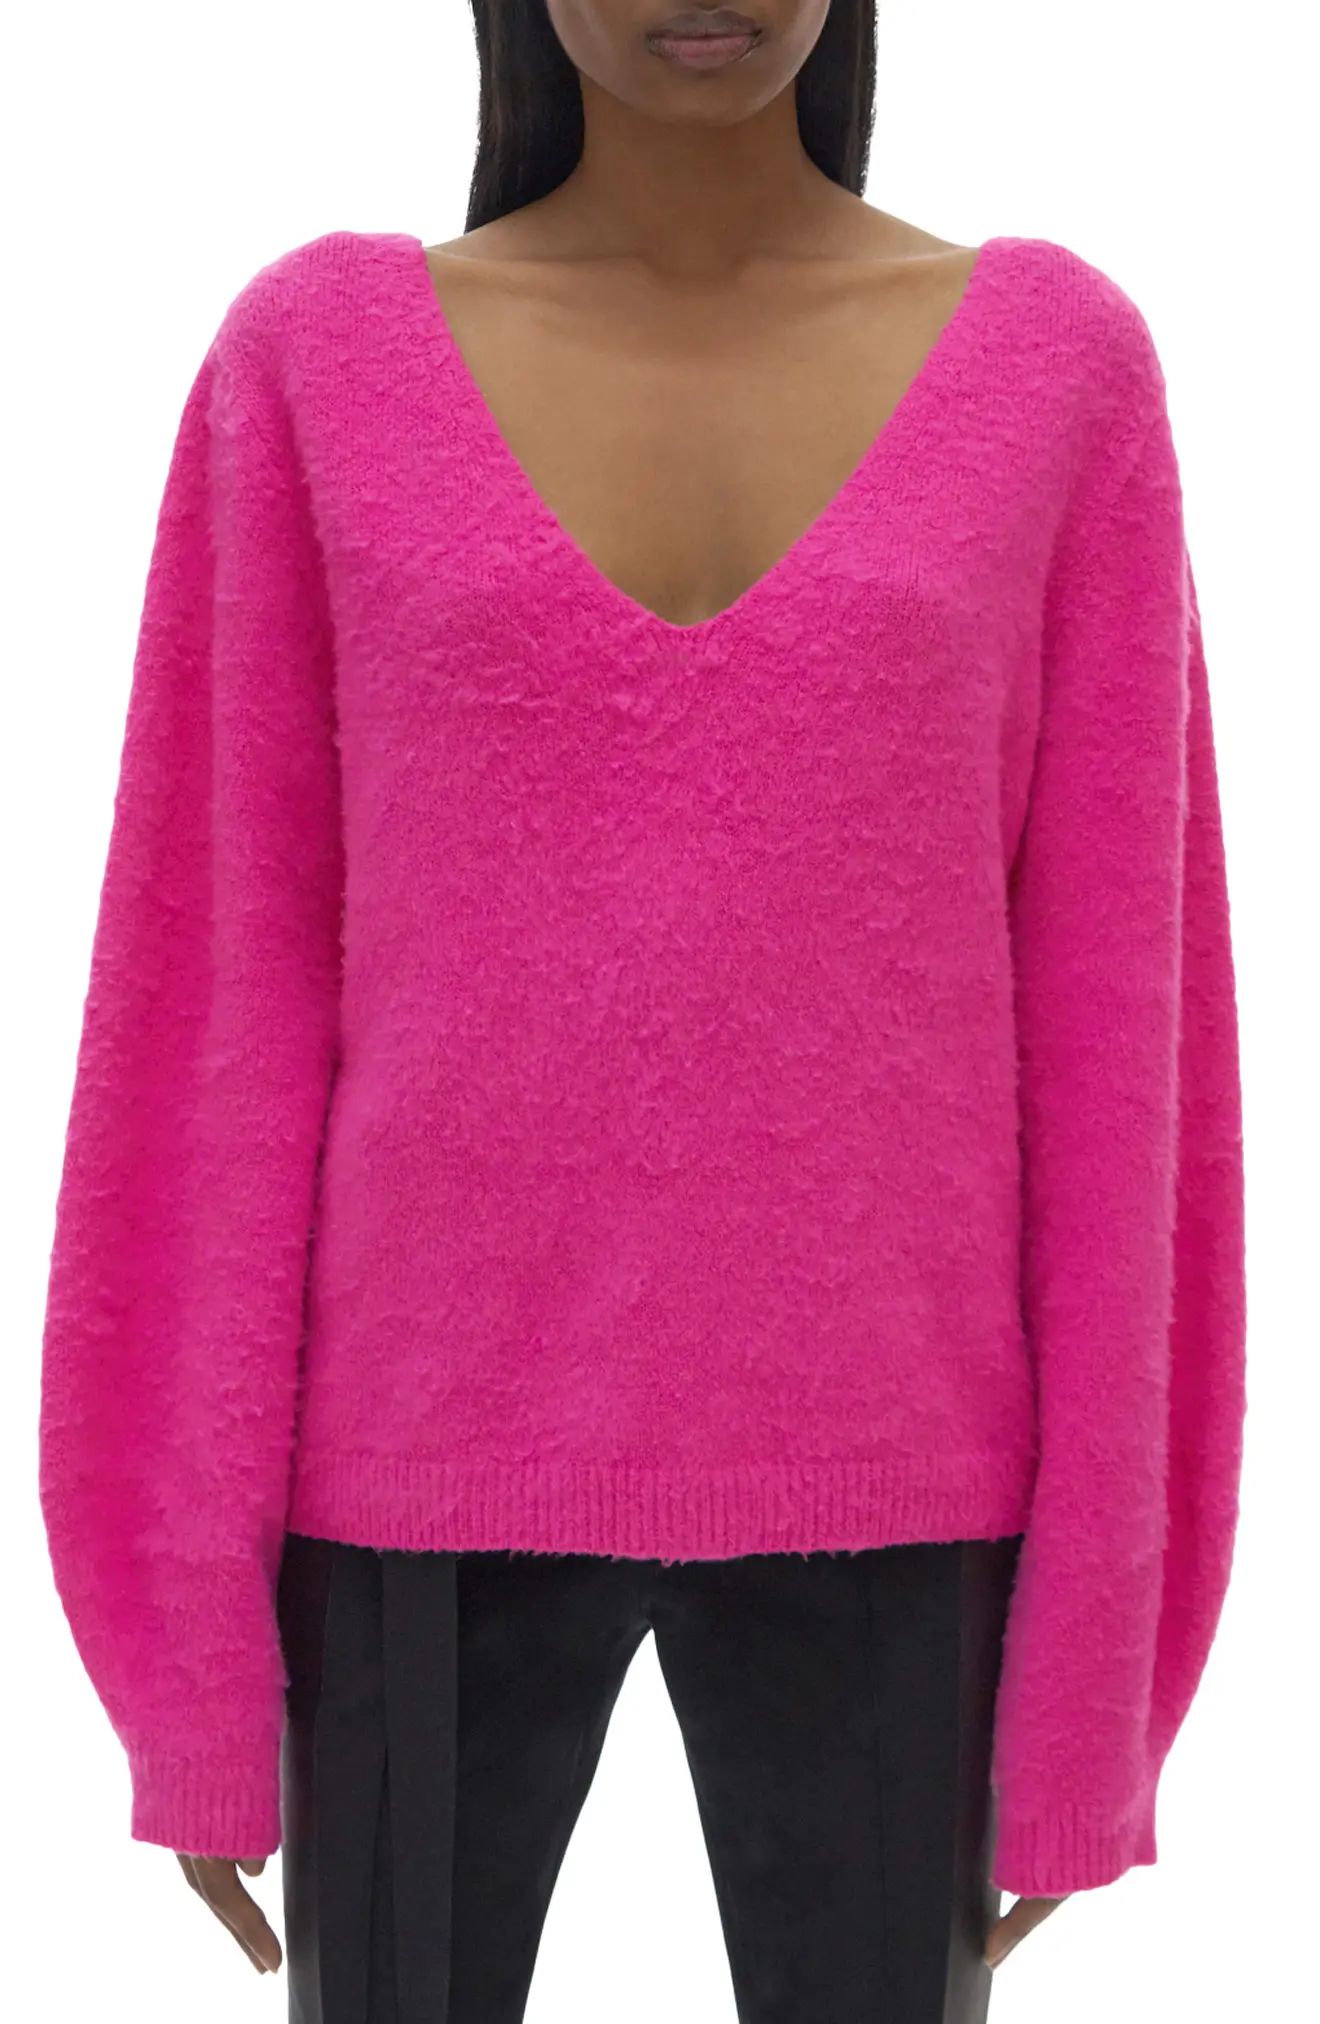 Helmut Lang Double V-Neck Brushed Cotton Blend Sweater, Size Small in Disco Pink at Nordstrom | Nordstrom